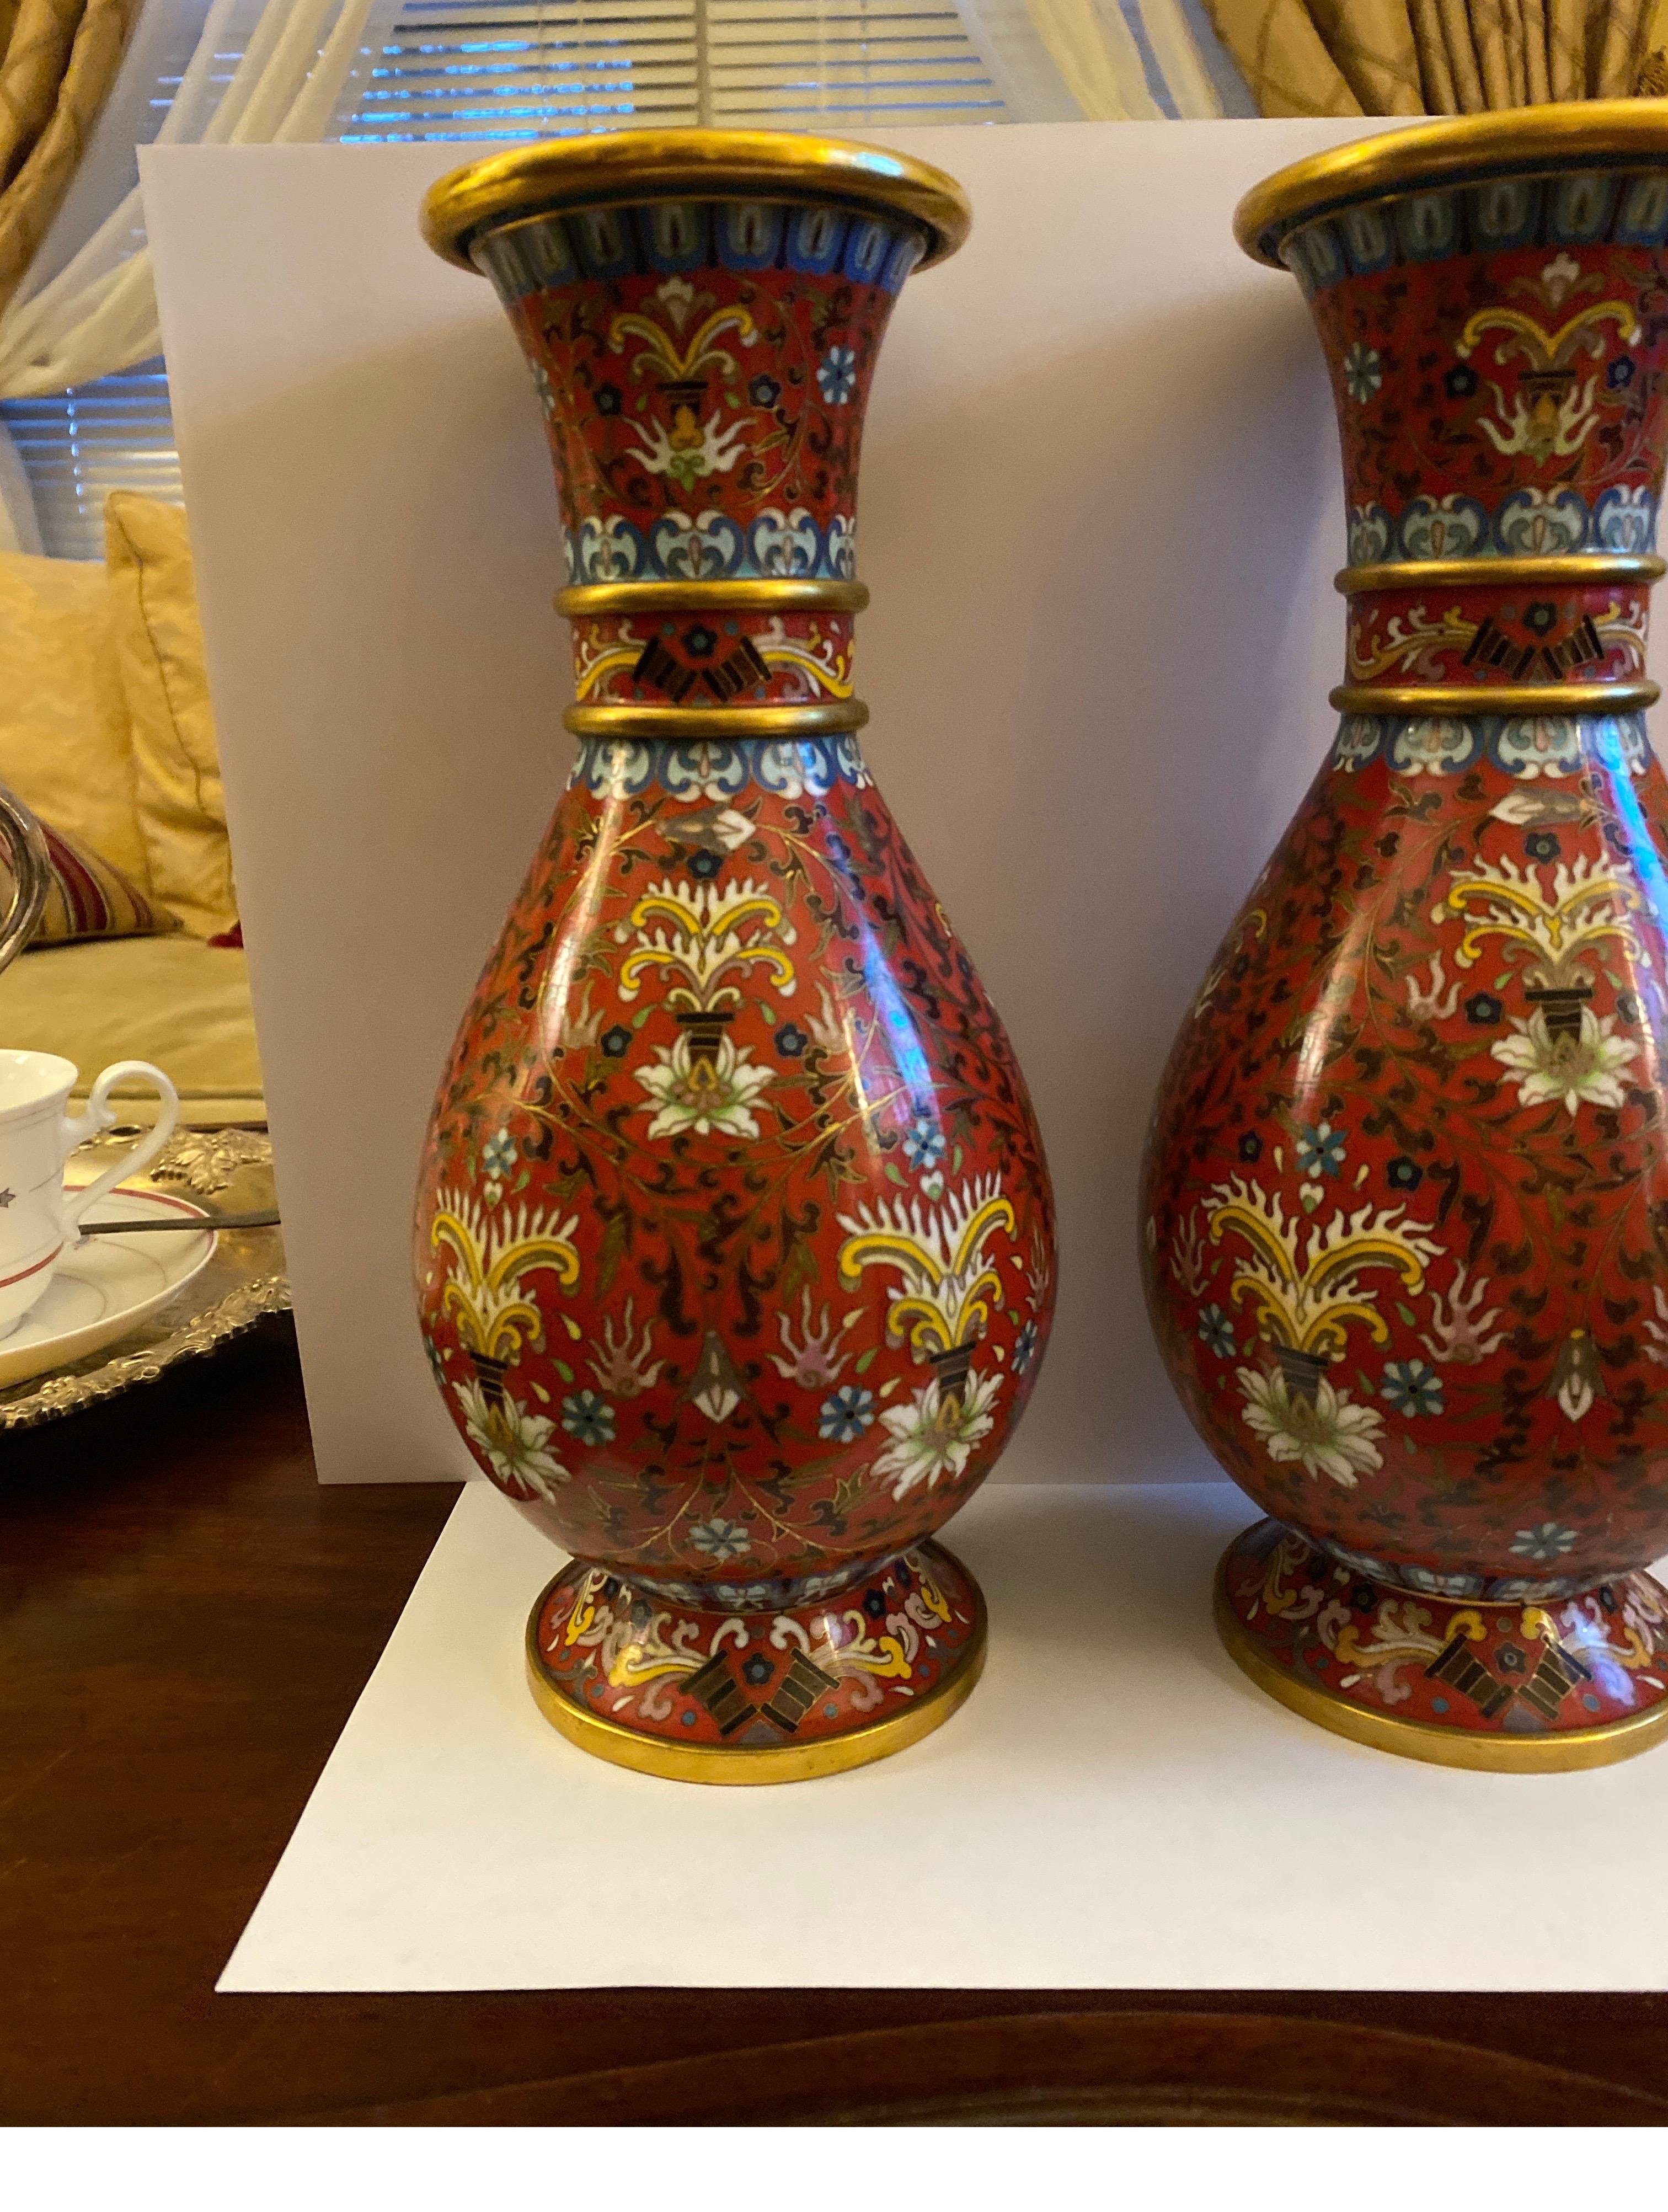 This pair of cloisonné enameled vases was created in Japan, mid-20th century. Each vase with elegant form features a gilt brass bottom ring, two gilt brass rings around the neck and one at the top. The pieces have dark rich cinnabar red ground